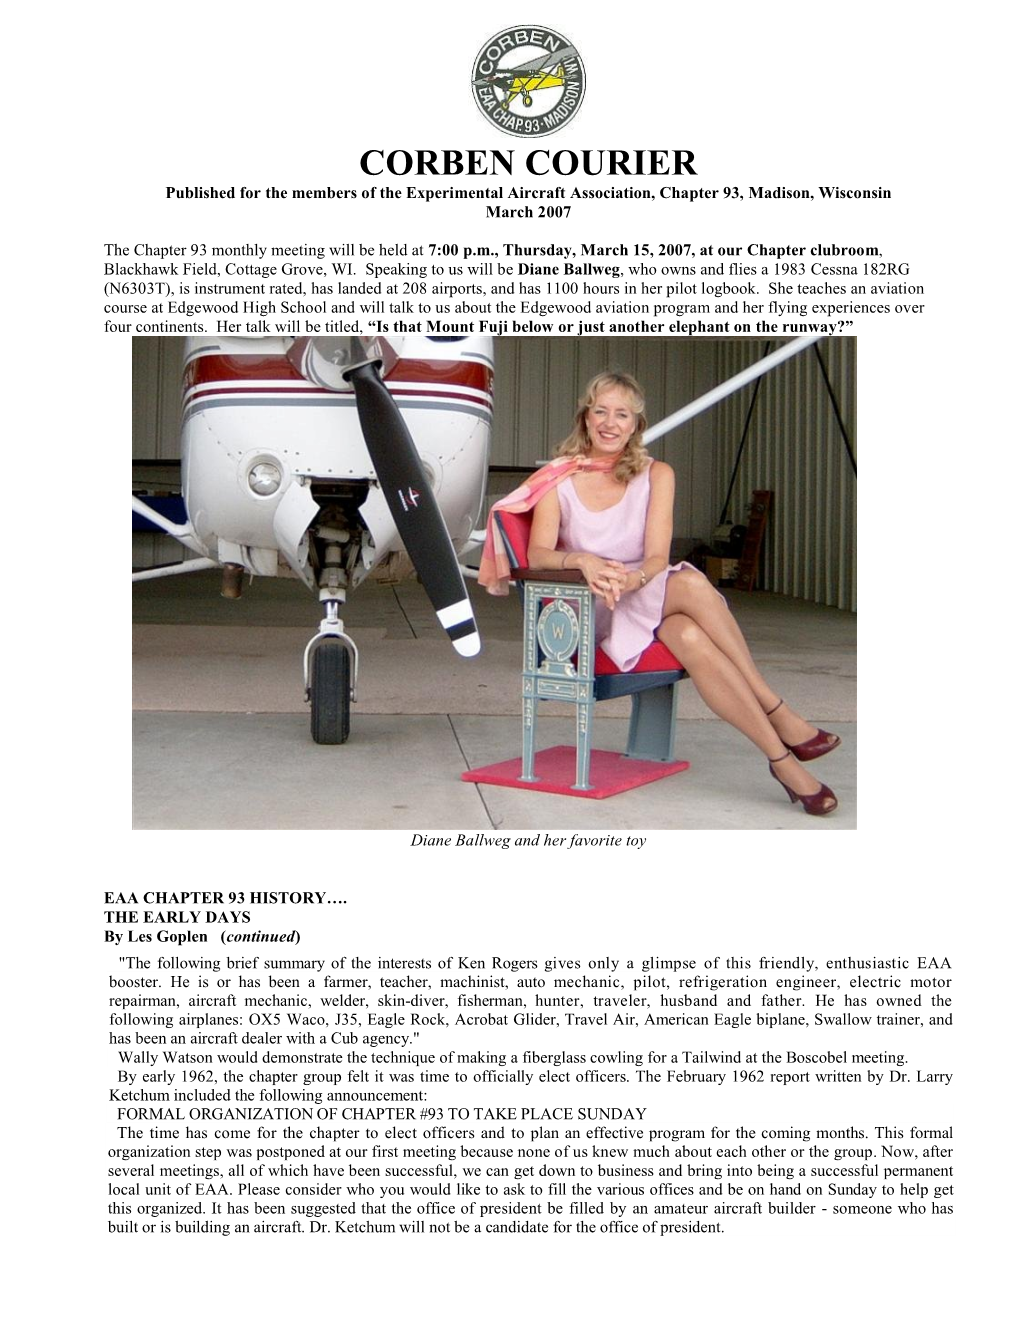 CORBEN COURIER Published for the Members of the Experimental Aircraft Association, Chapter 93, Madison, Wisconsin March 2007